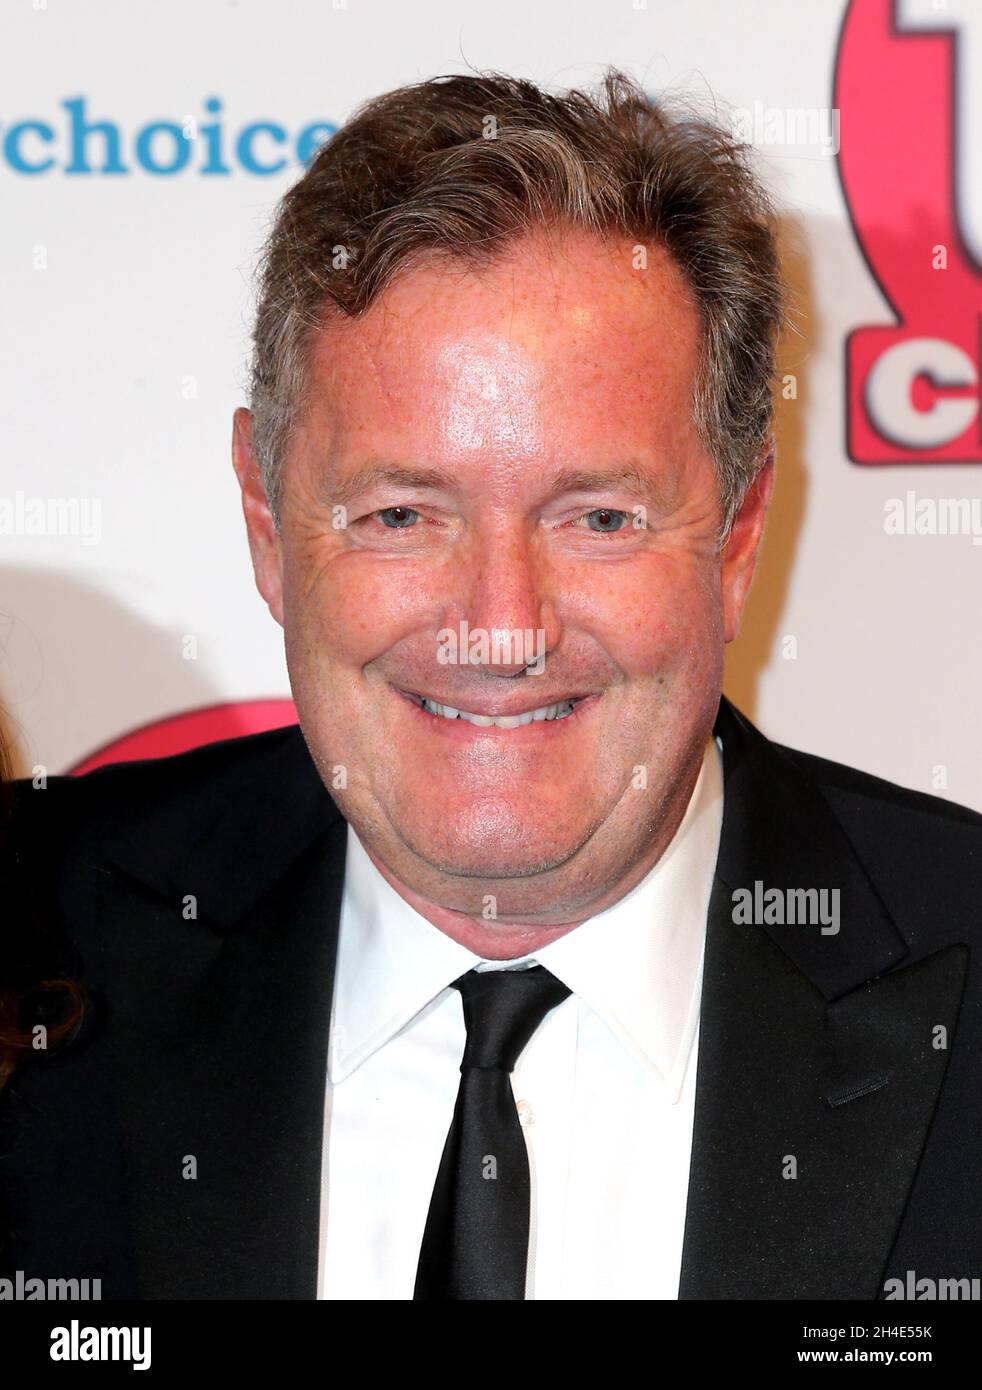 Piers Morgan attending the TV Choice Awards held at the Hilton Hotel, Park Lane, London Stock Photo